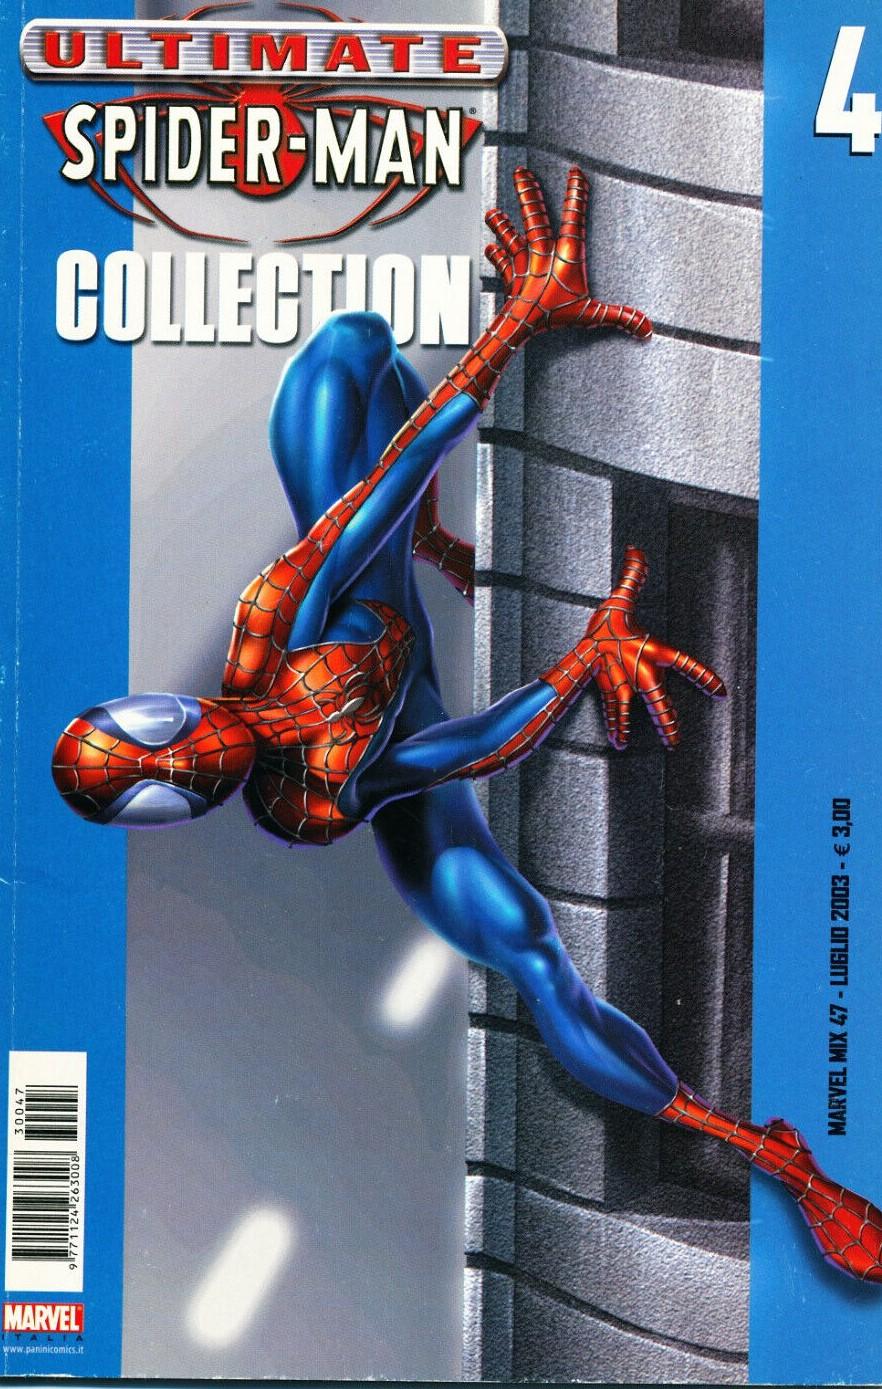 ULTIMATE SPIDER-MAN COLLECTION #4 MARVEL MIX #47 - PANINI COMICS (2003)